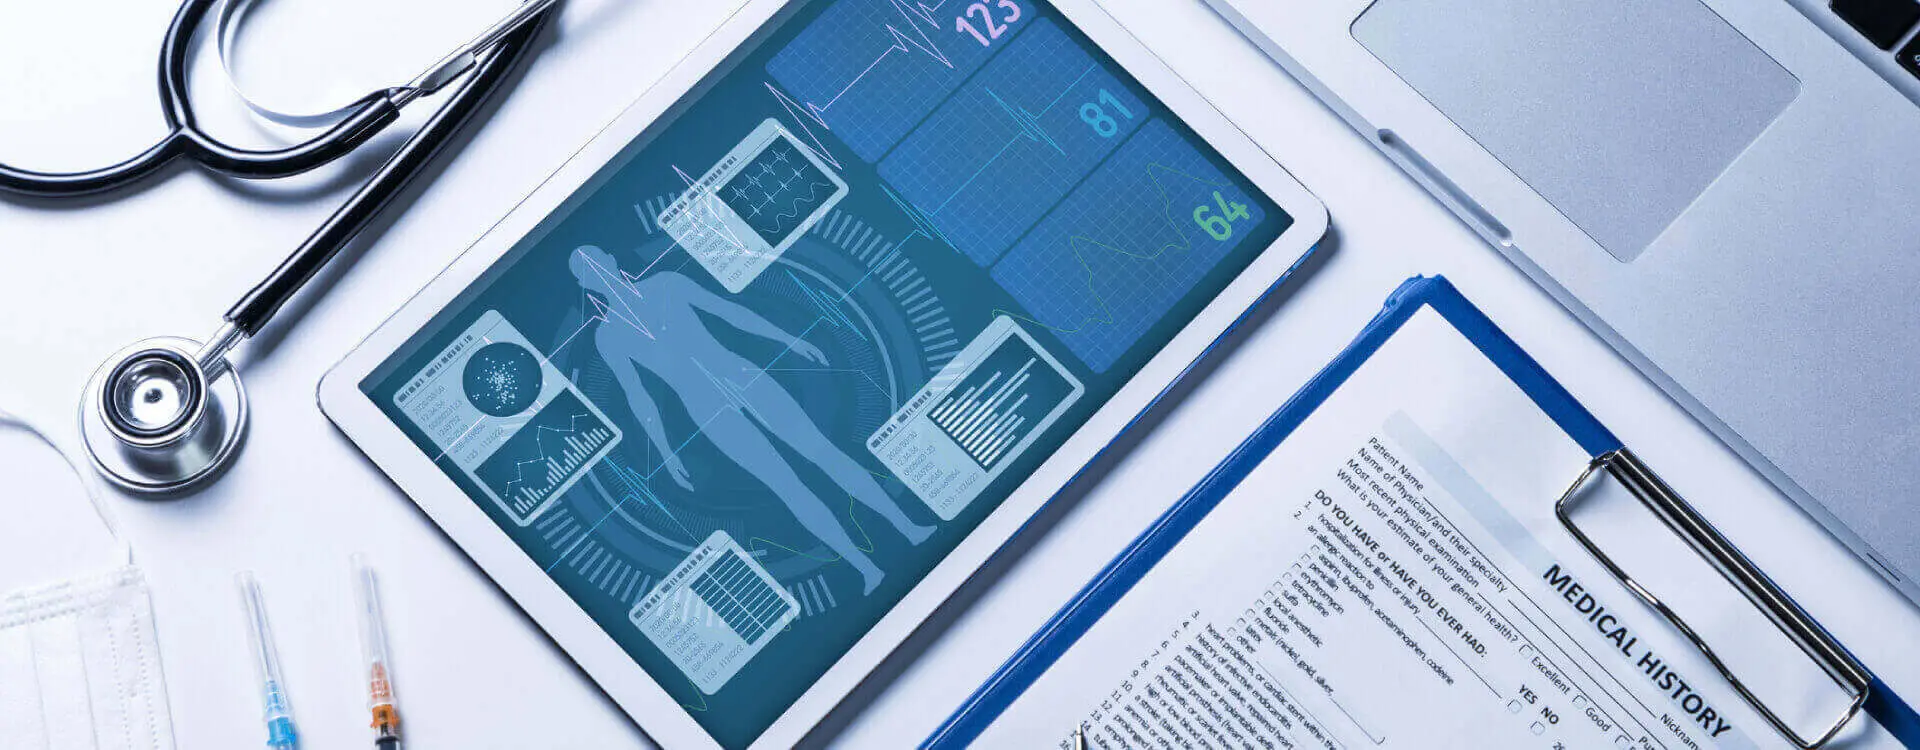 Rendering of patient's vitals displayed on tablet alongside their medical history.